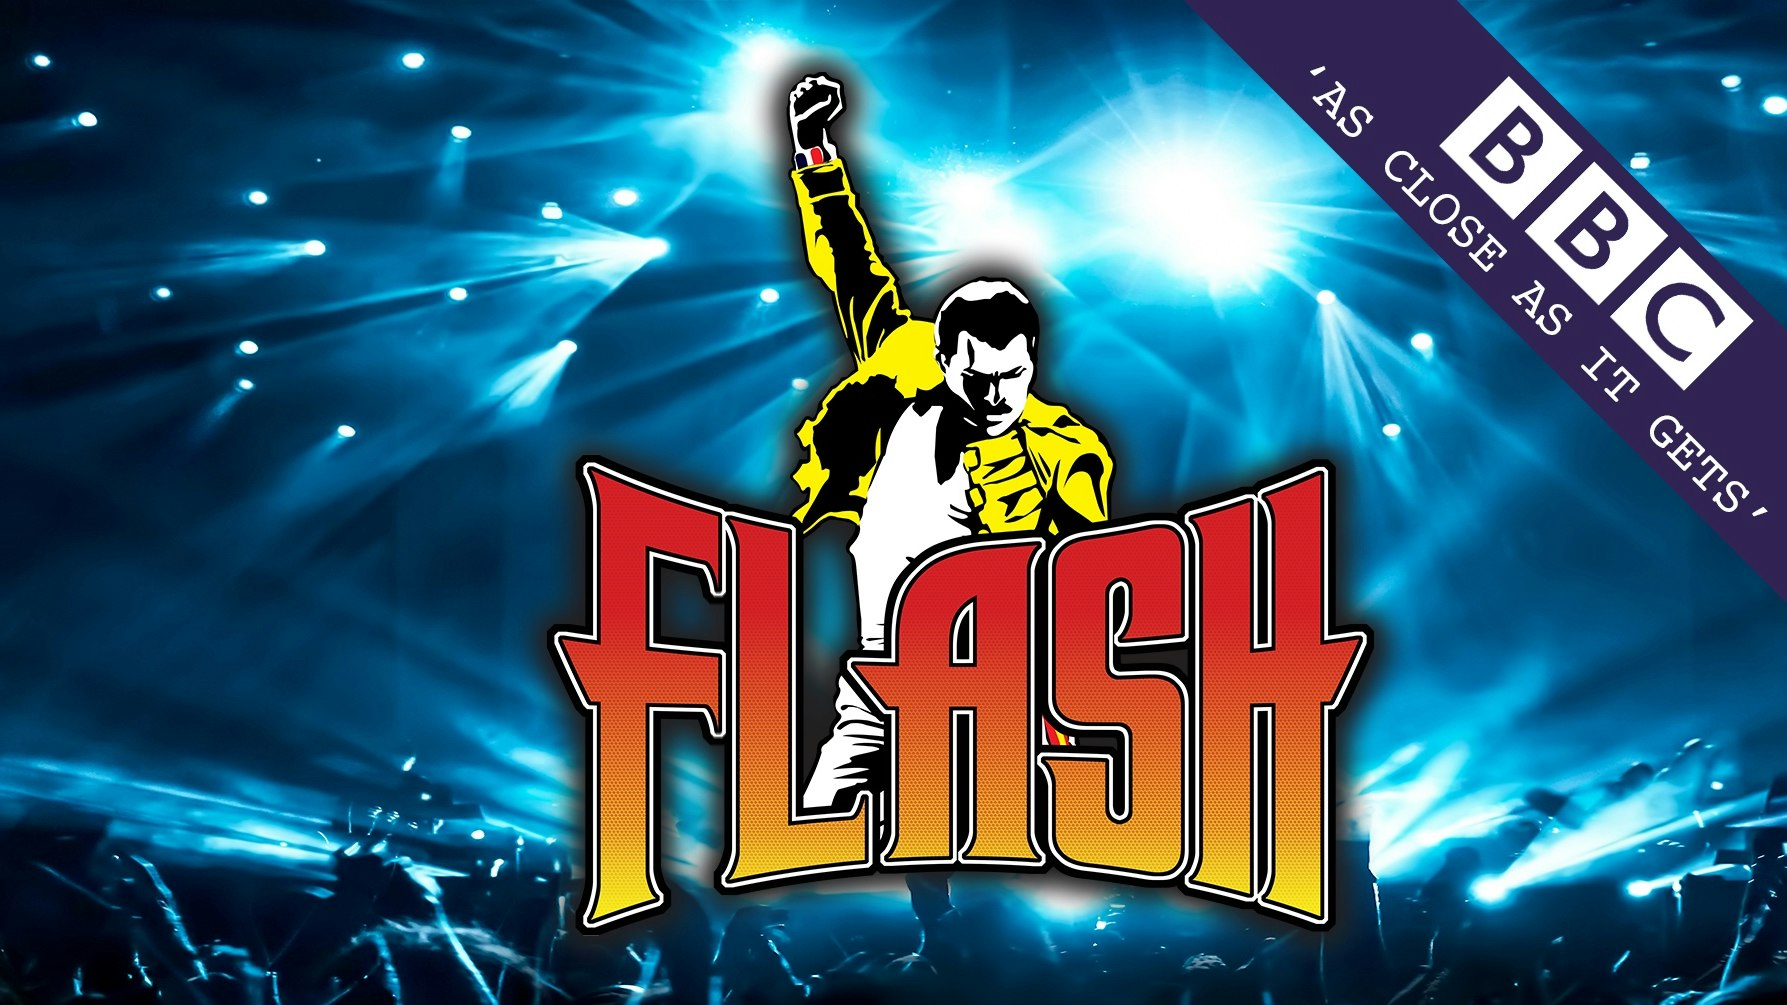 QUEEN’S GREATEST HITS – starring FLASH – the No.1 Queen Tribute LIVE